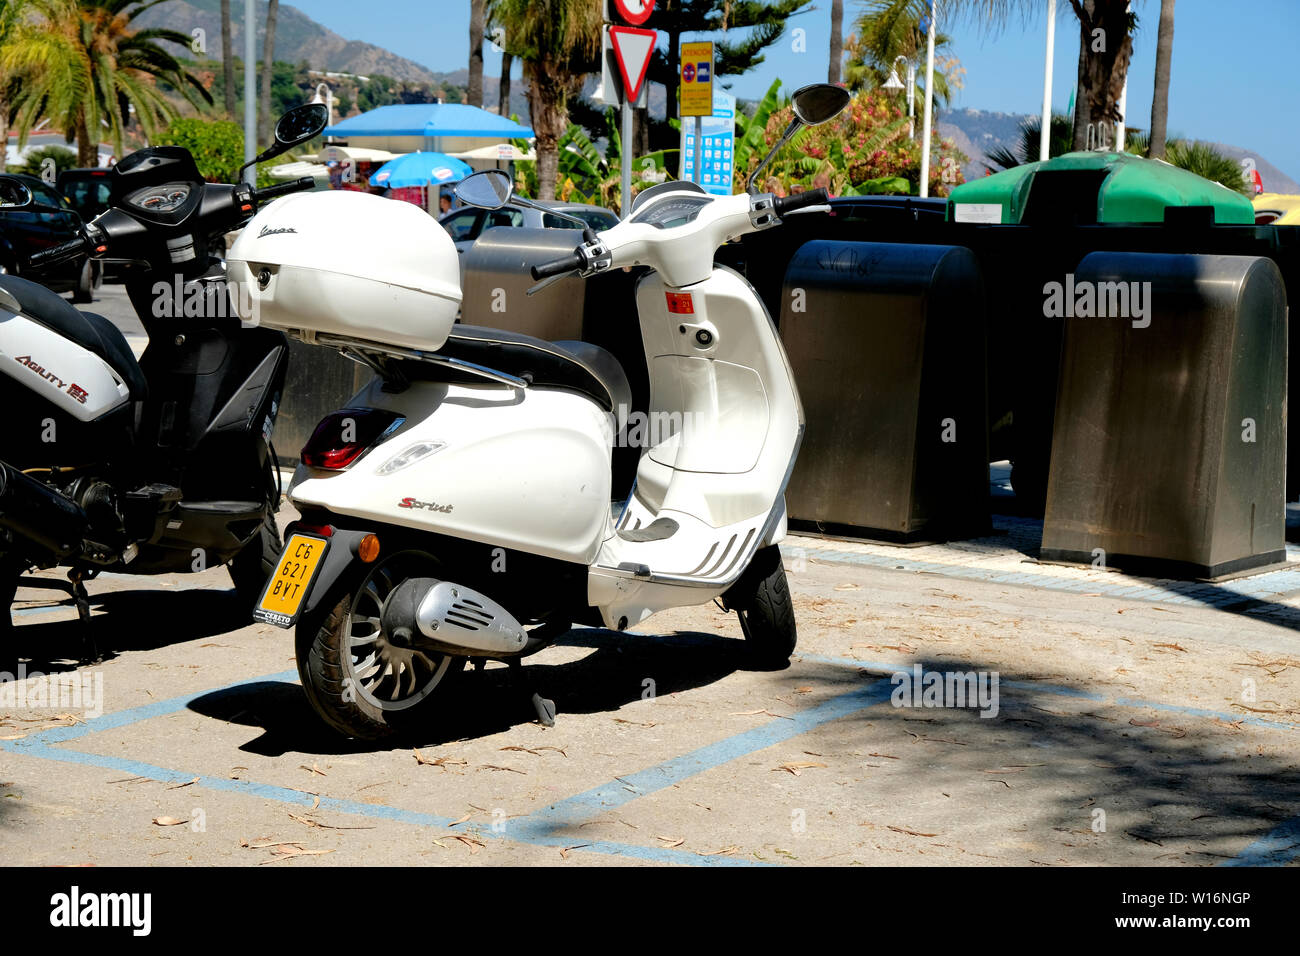 White Vespa Sprint with matching storage top box or top case parked near  some recycling bins or containers in Nerja, Spain Stock Photo - Alamy